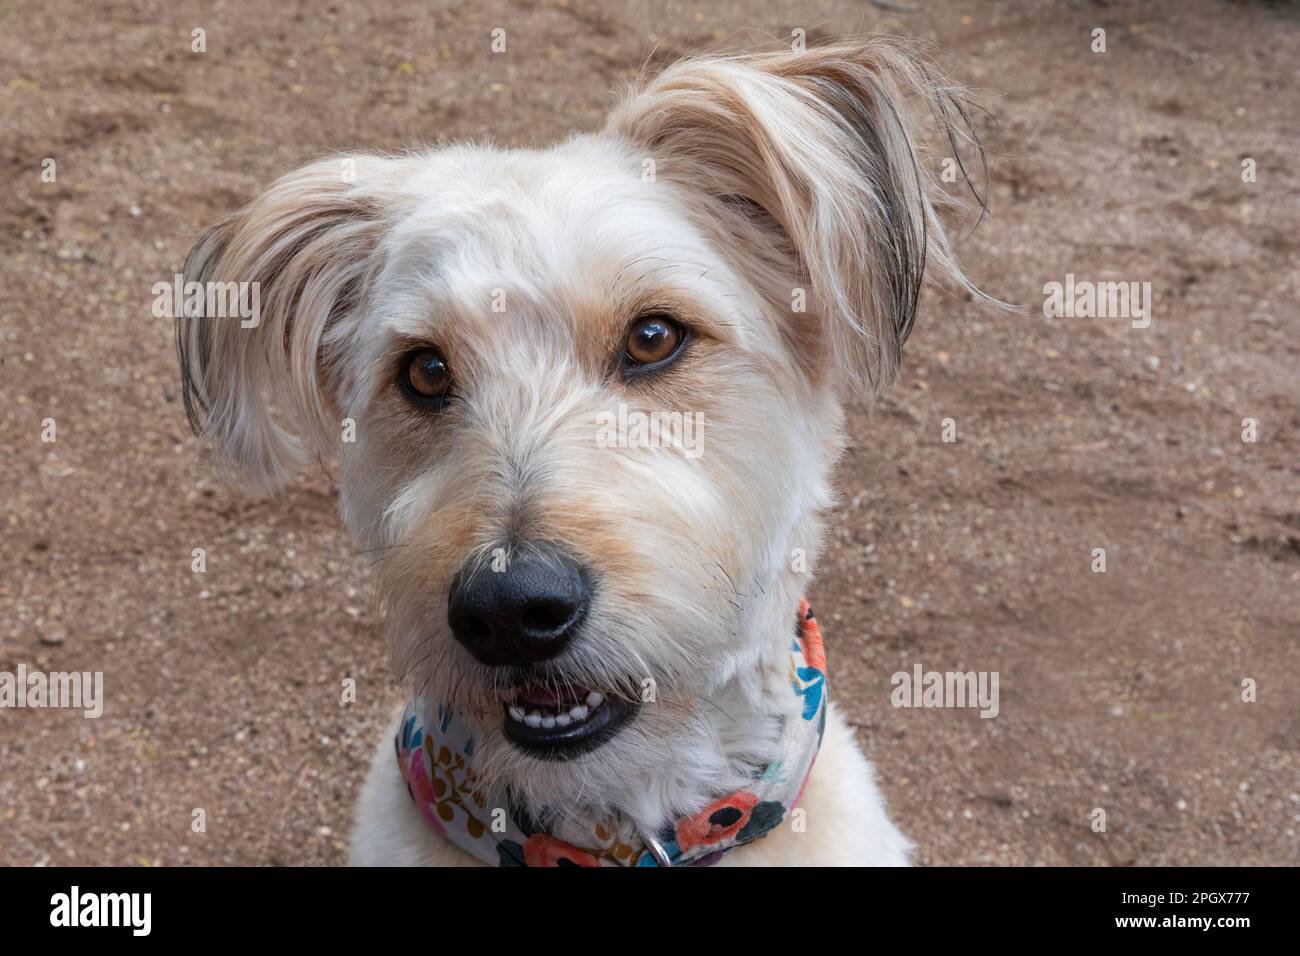 Cute dog, poodle mix, looking at camera. Stock Photo